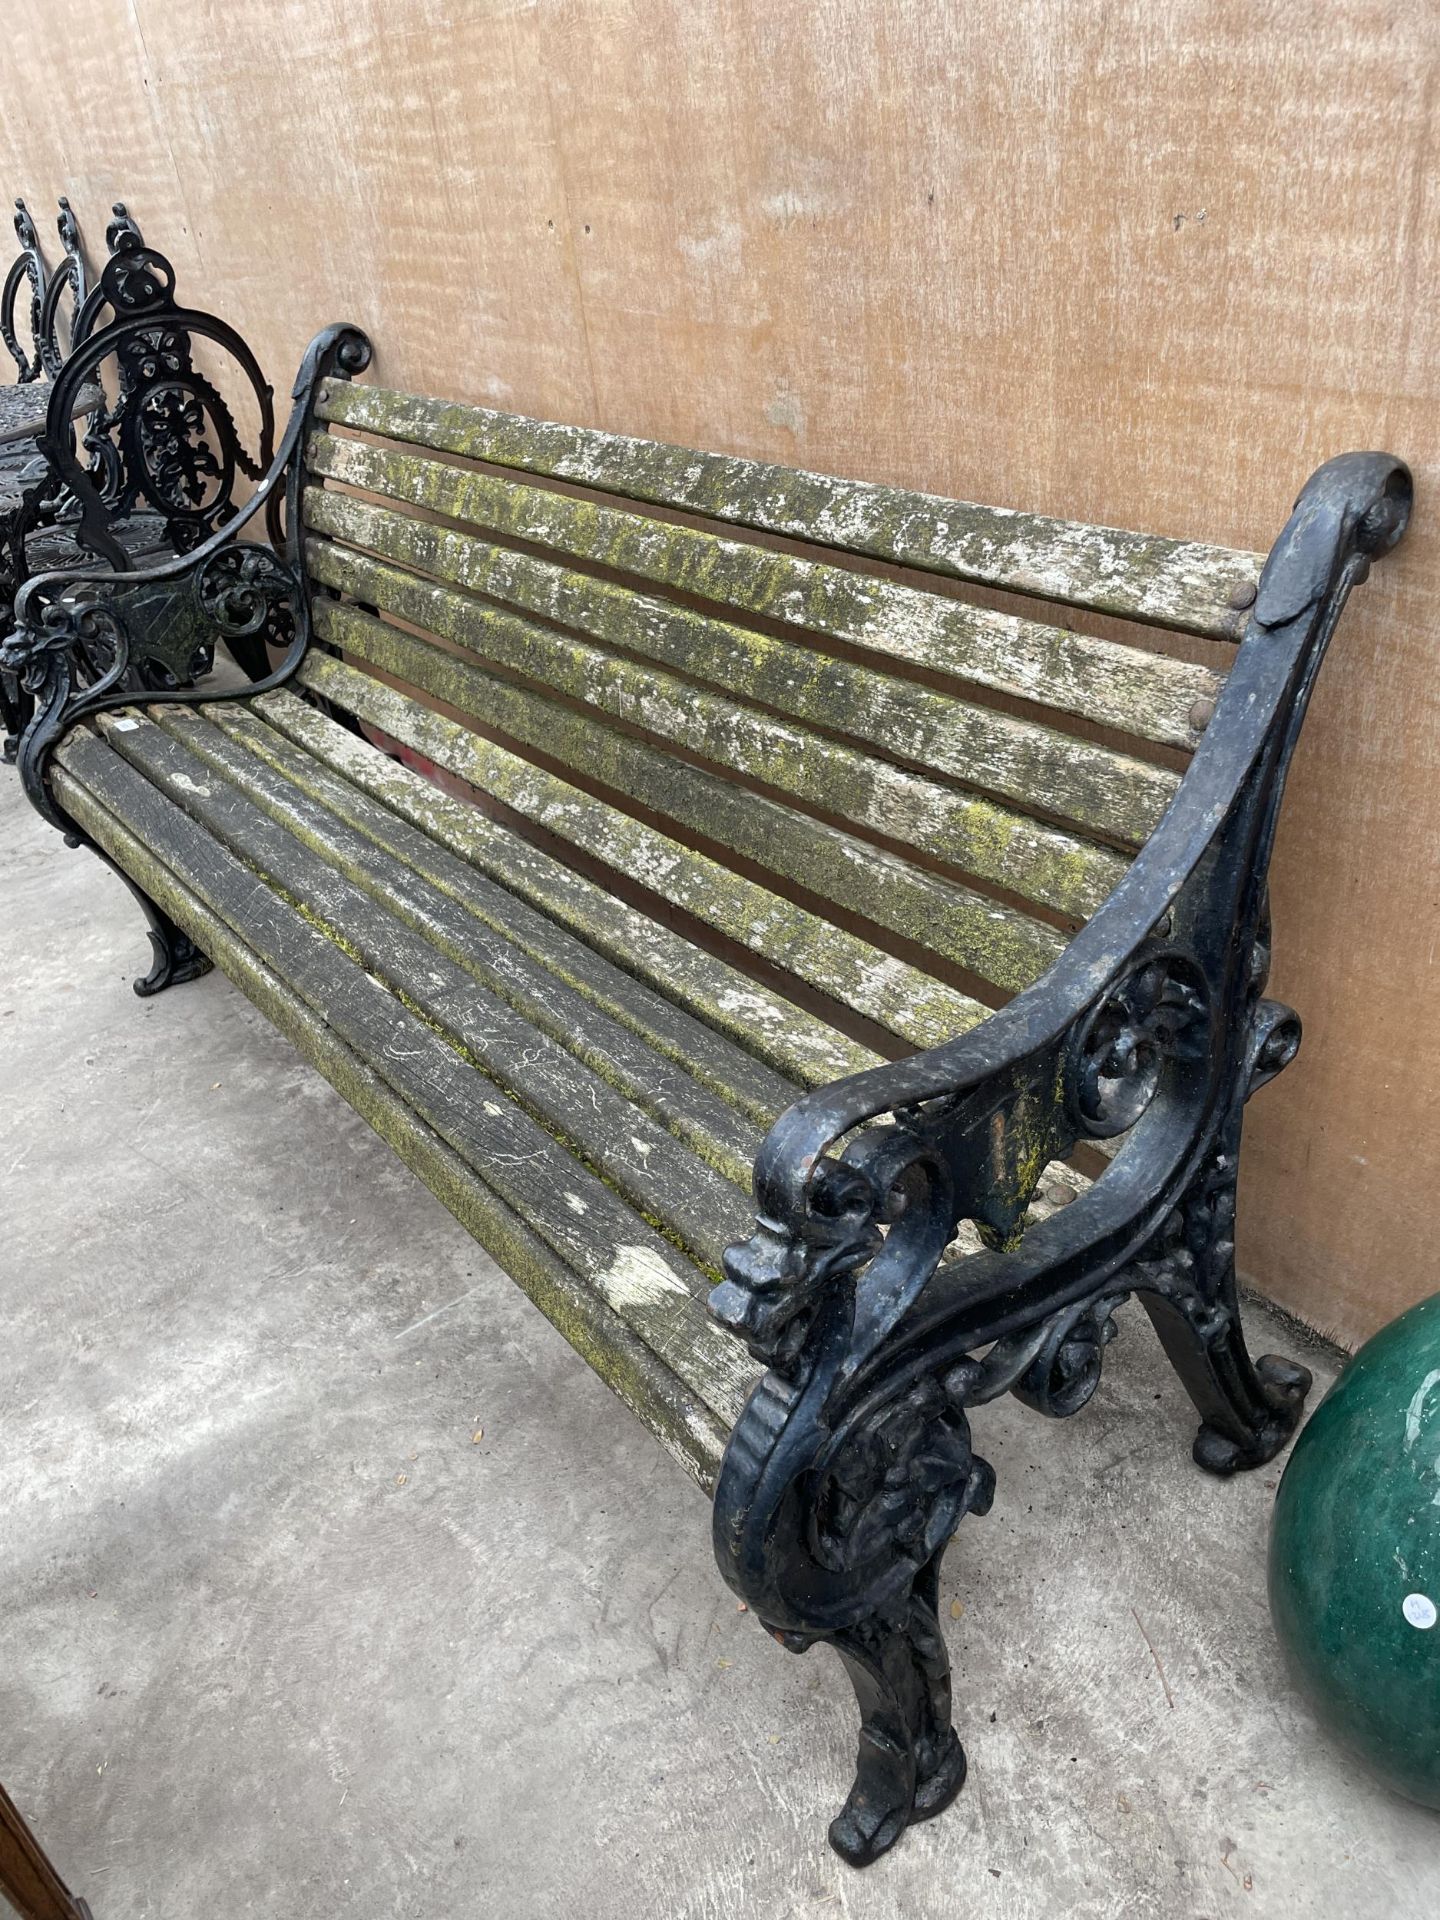 A HEAVY DUTY WOODEN SLATTED GARDEN BENCH WITH A PAIR OF HEAVILY DECORATED CAST IRON BENCH ENDS - Image 3 of 3